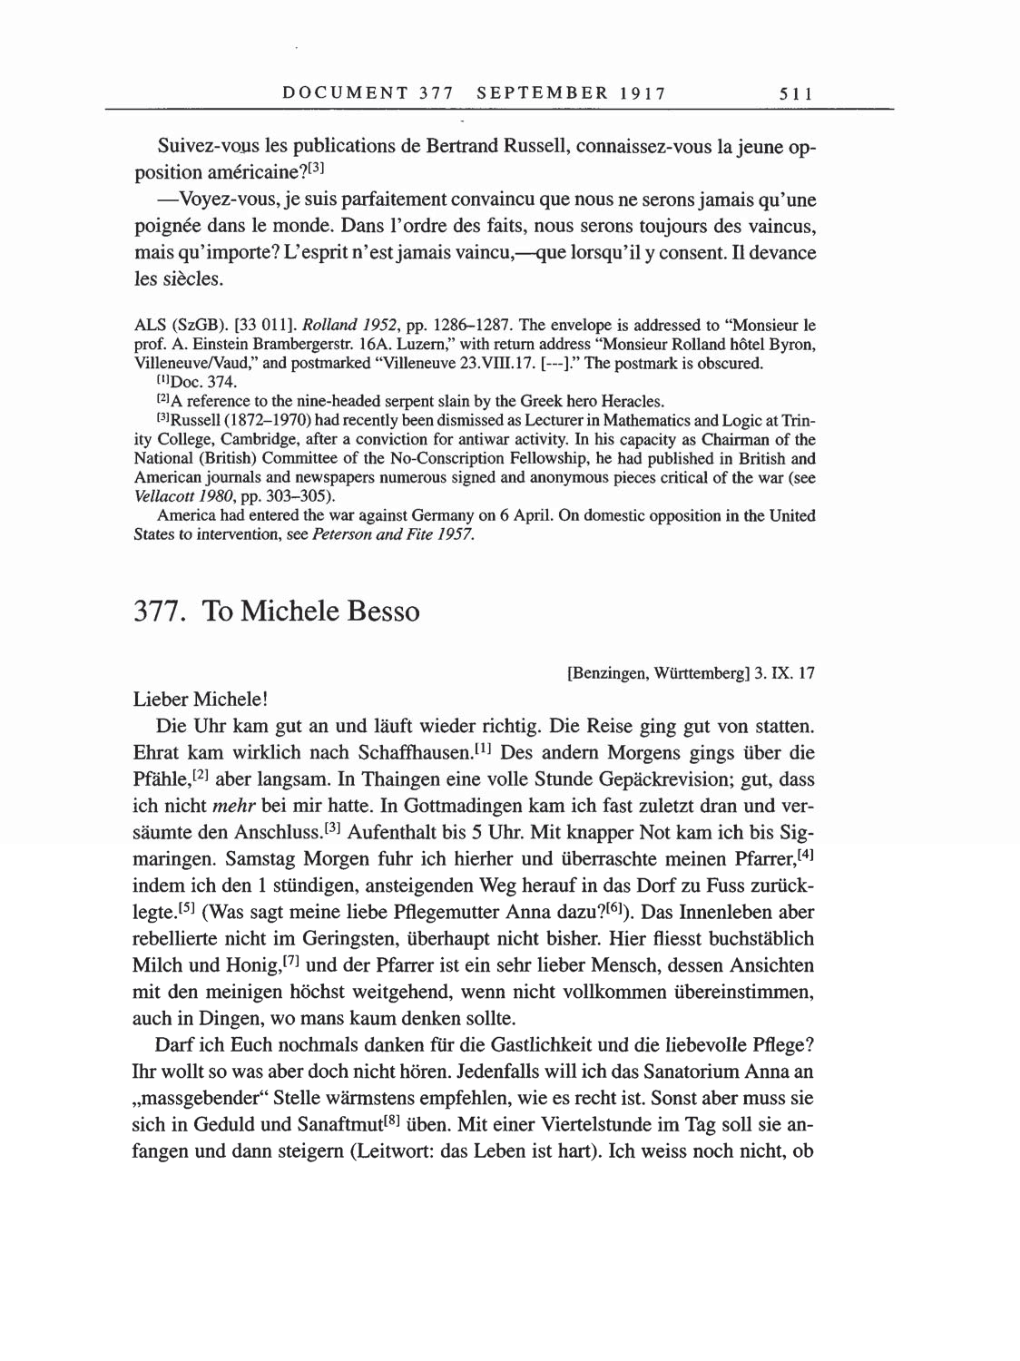 Volume 8, Part A: The Berlin Years: Correspondence 1914-1917 page 511